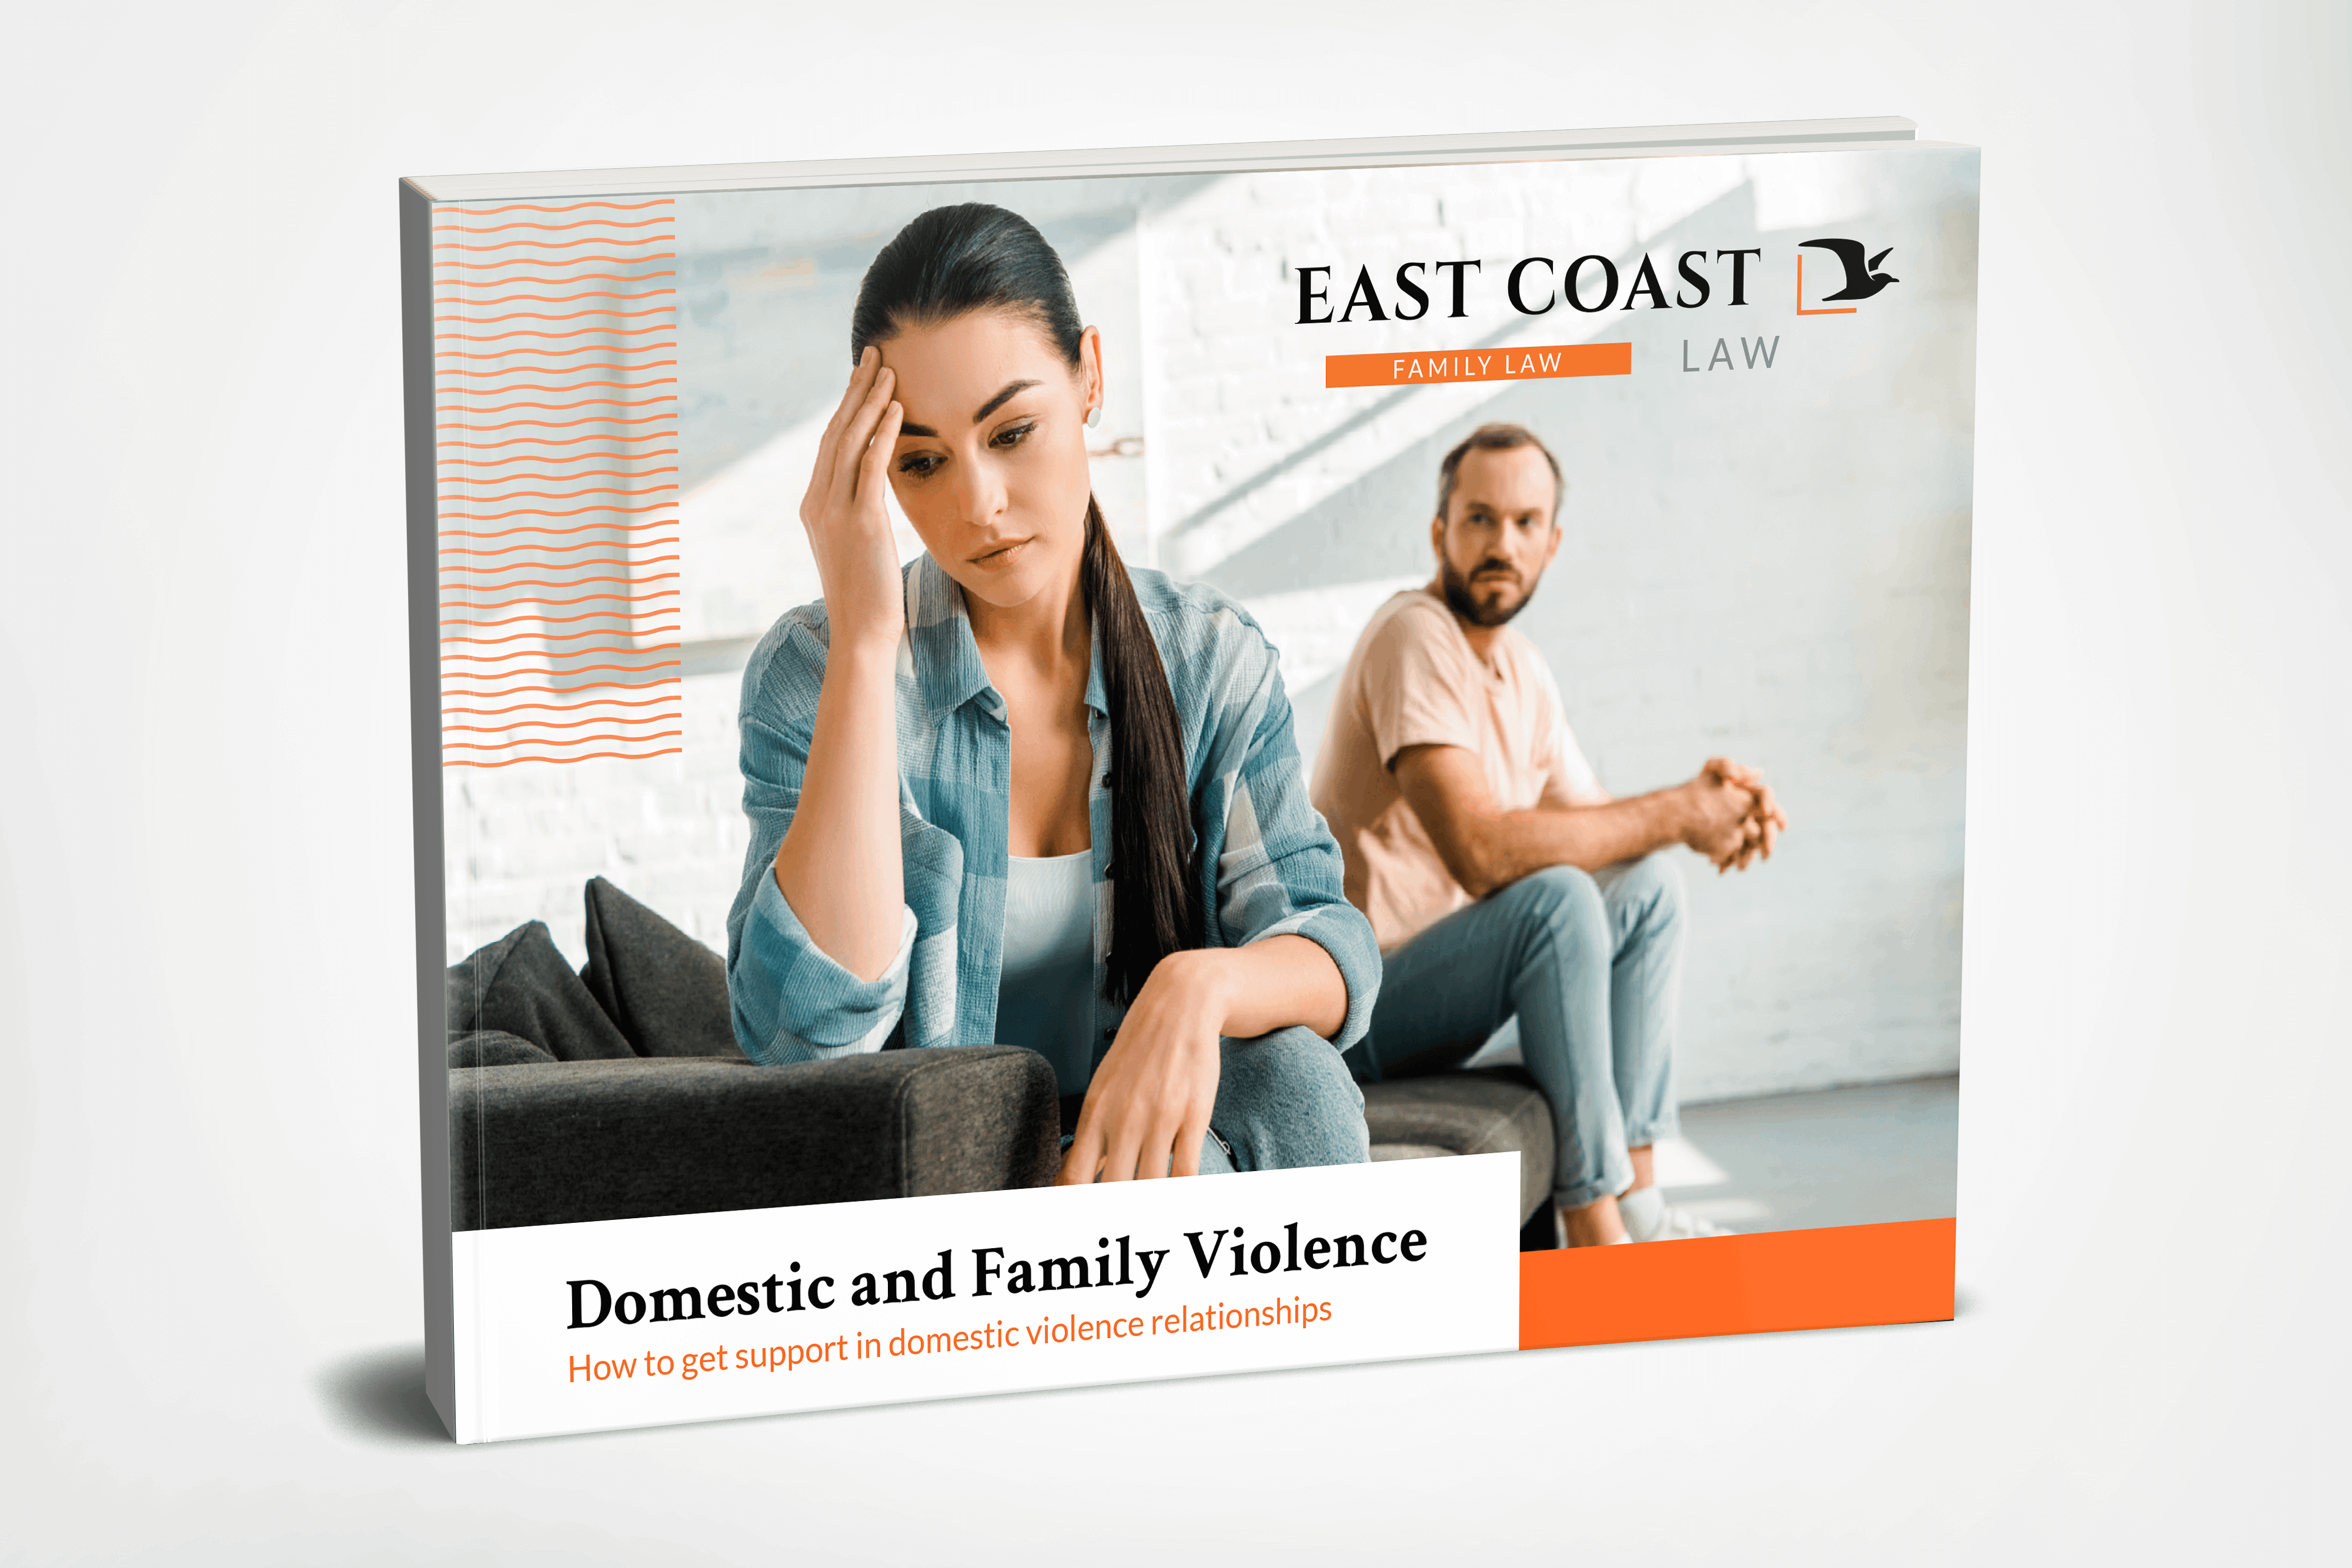 Domestic and Family Violence: How to get support in domestic violence relationships